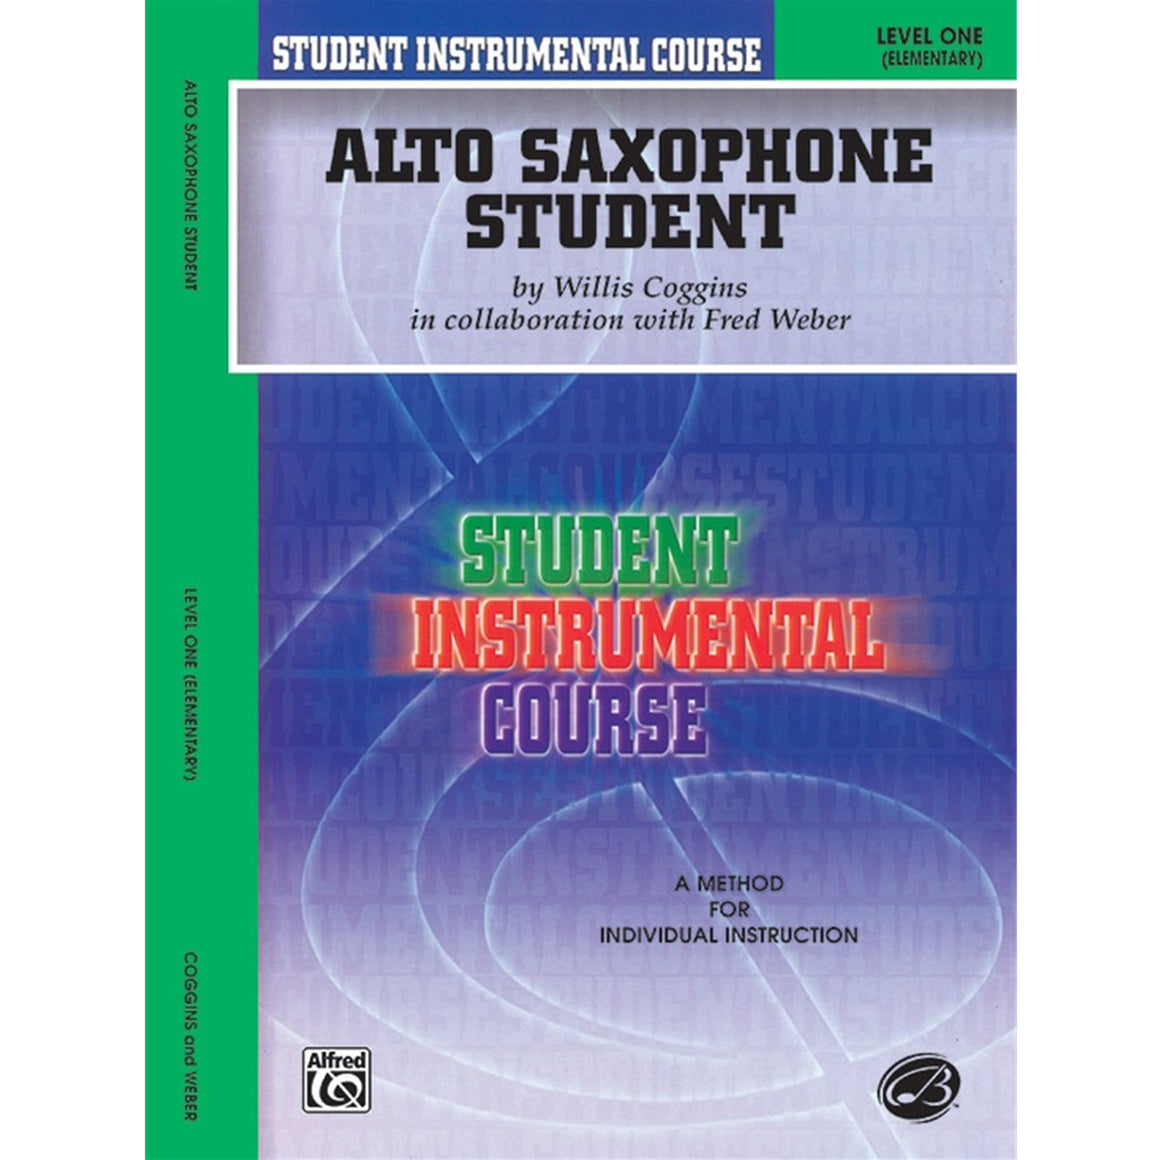 ALFRED BIC00131A Student Instrumental Course: Alto Saxophone Student, Level I [Saxophone]